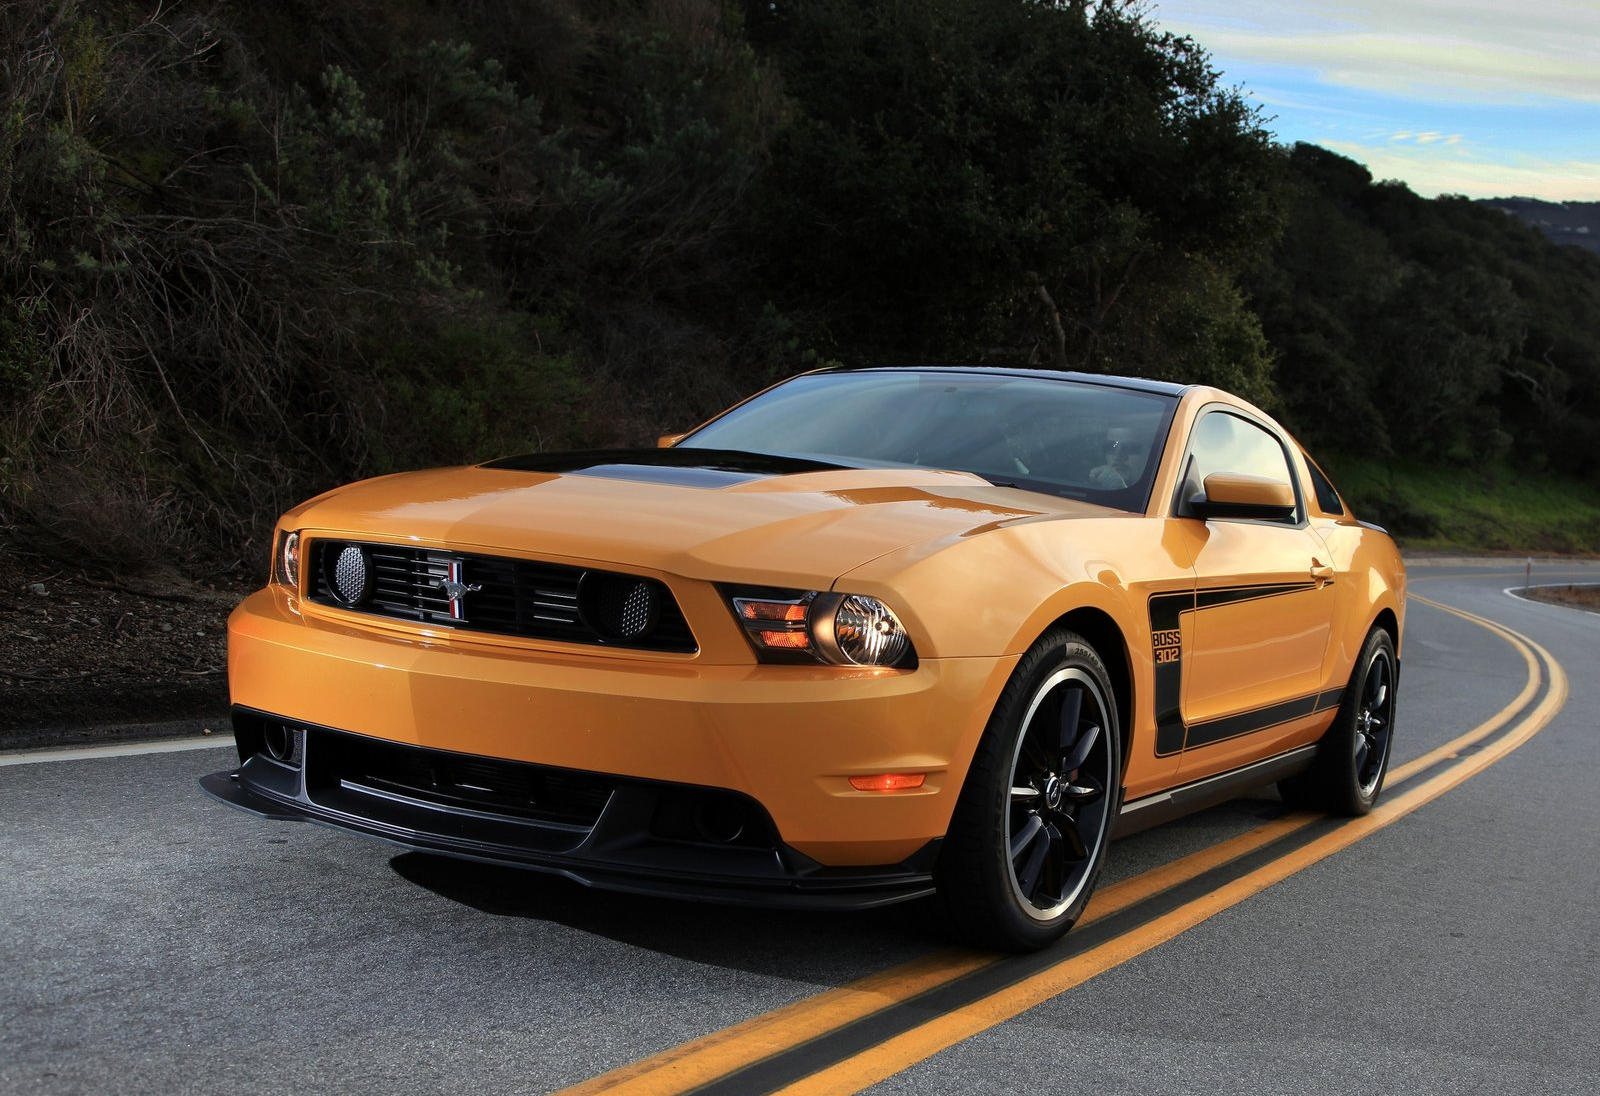 2012 Ford Mustang Boss 302 Review Trims Specs Price New Interior